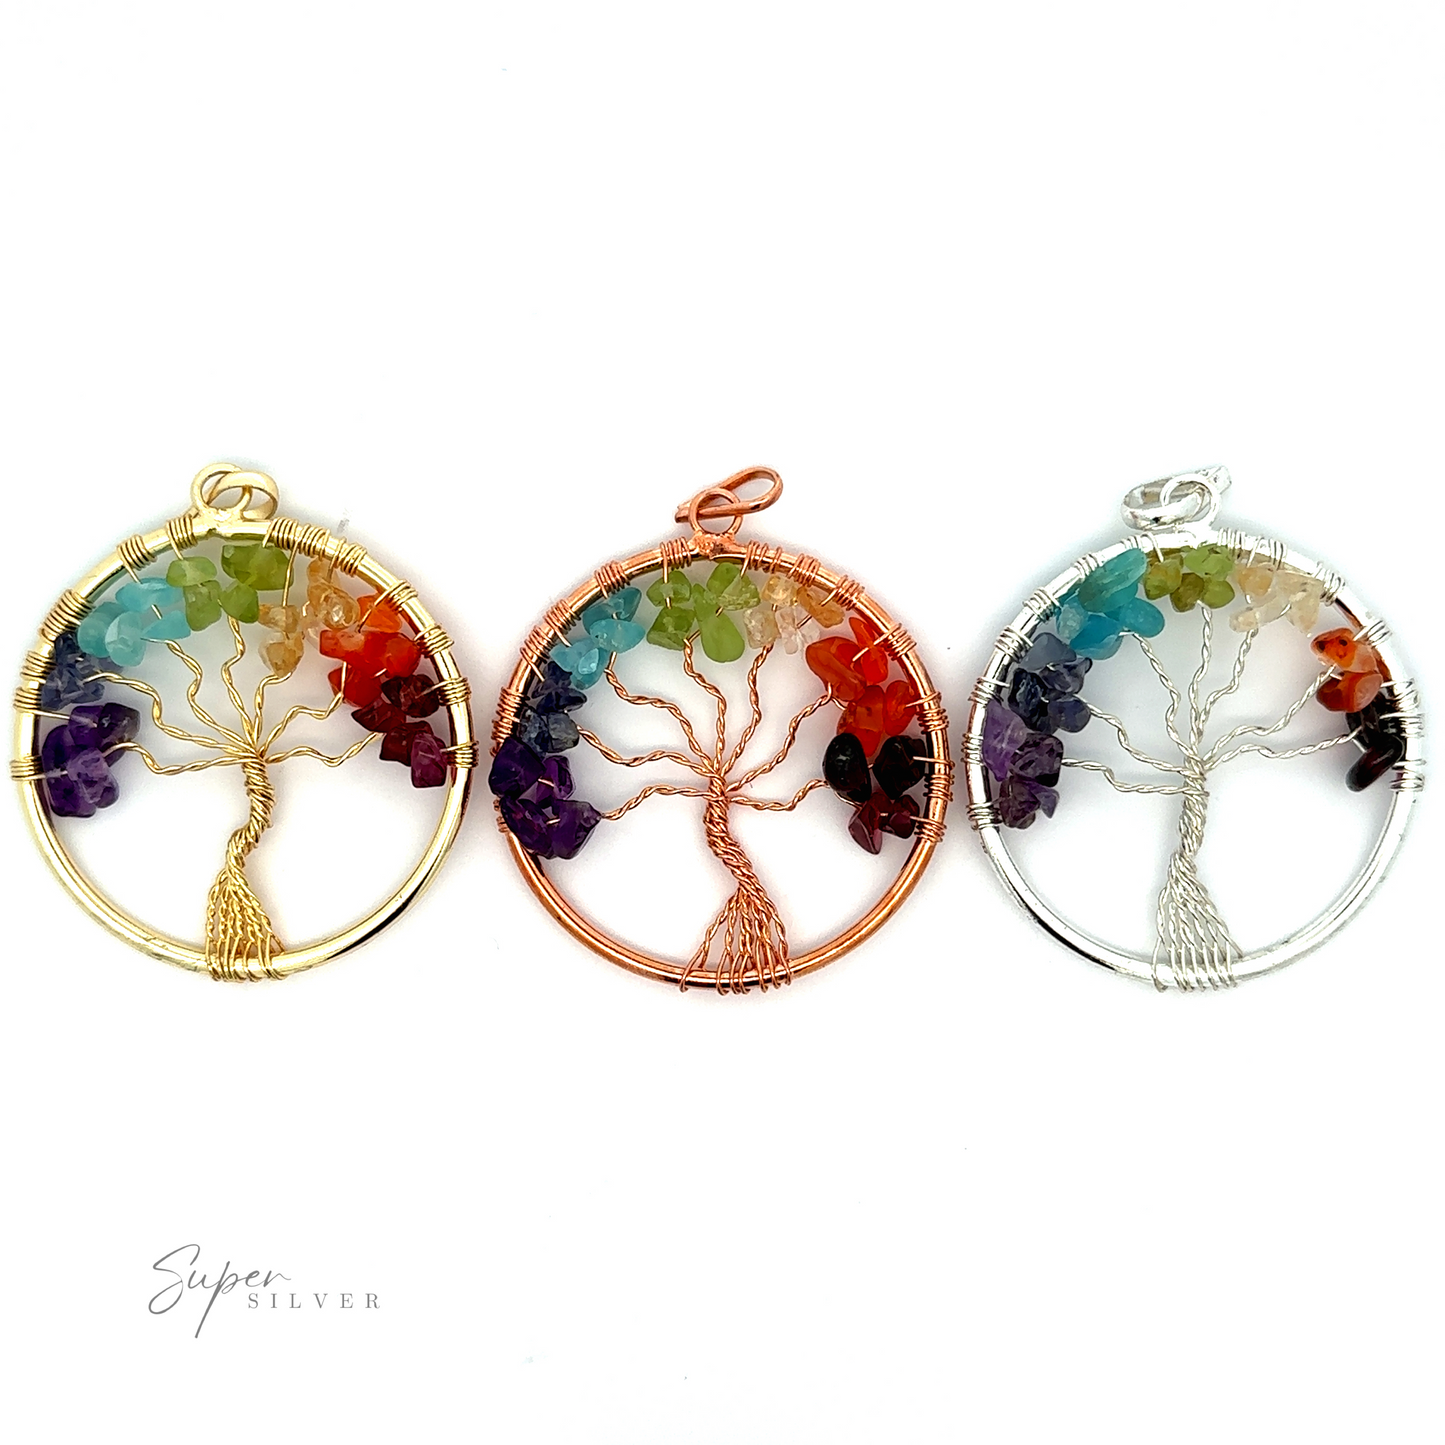 
                  
                    Three circular Wire-Wrapped Chakra Tree of Life Pendants featuring exquisite wire-wrapped tree designs with multicolored chakra stone leaves. The pendants have frames in gold, copper, and silver colors, respectively.
                  
                